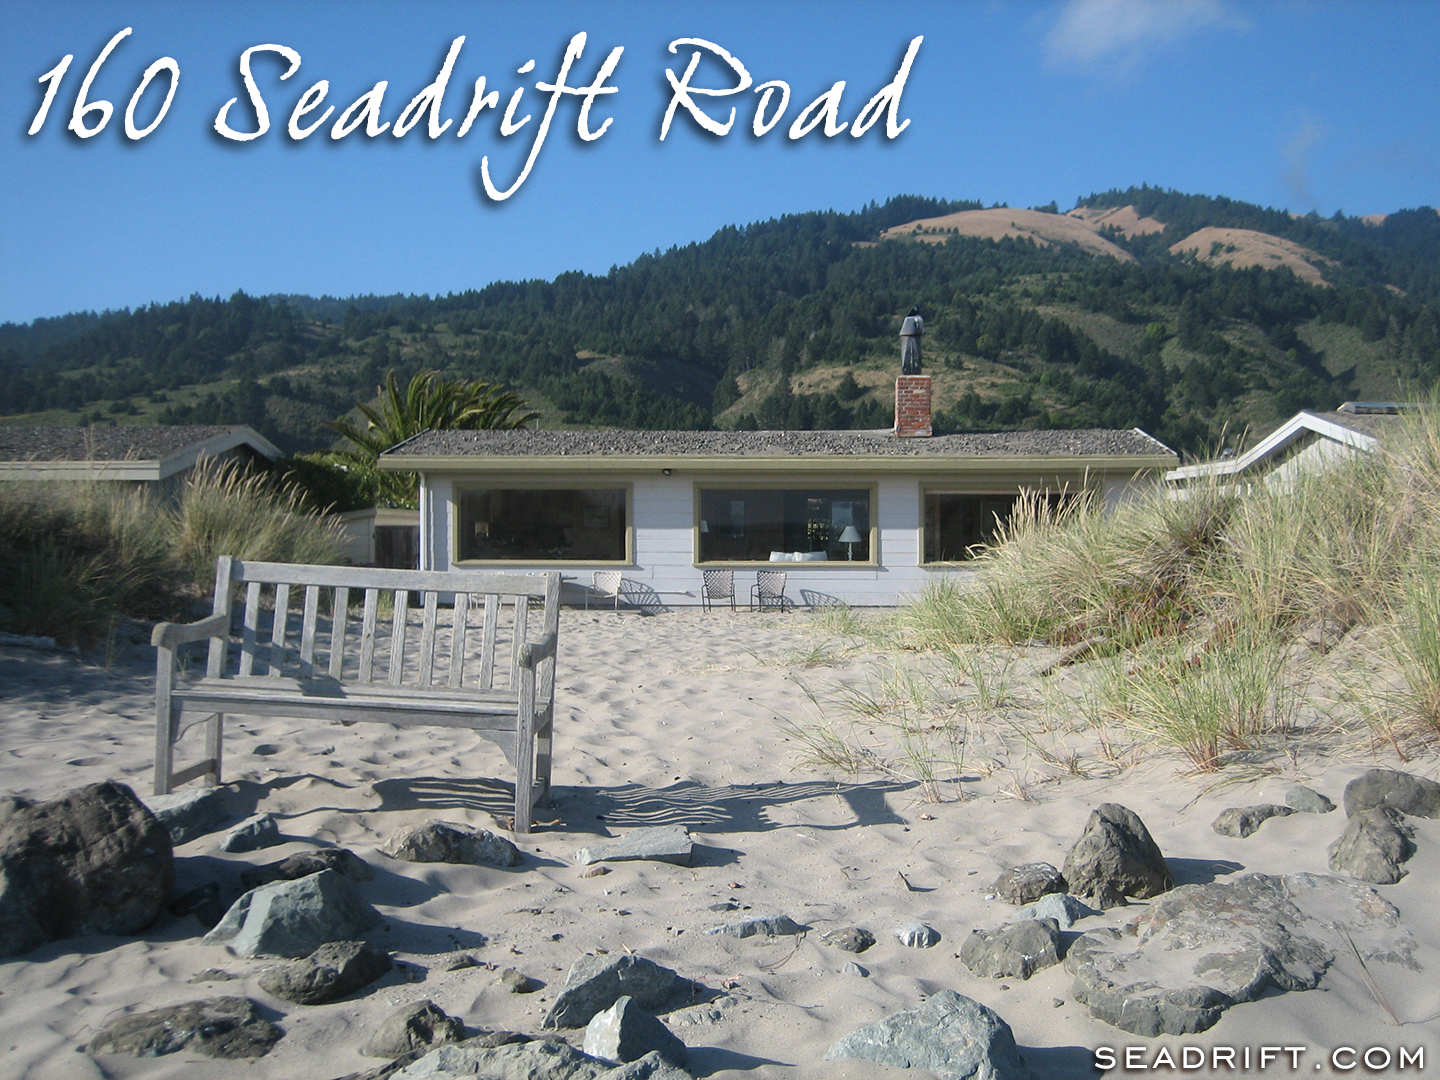 160 Seadrift Road, Stinson Beach — View to house from dunes